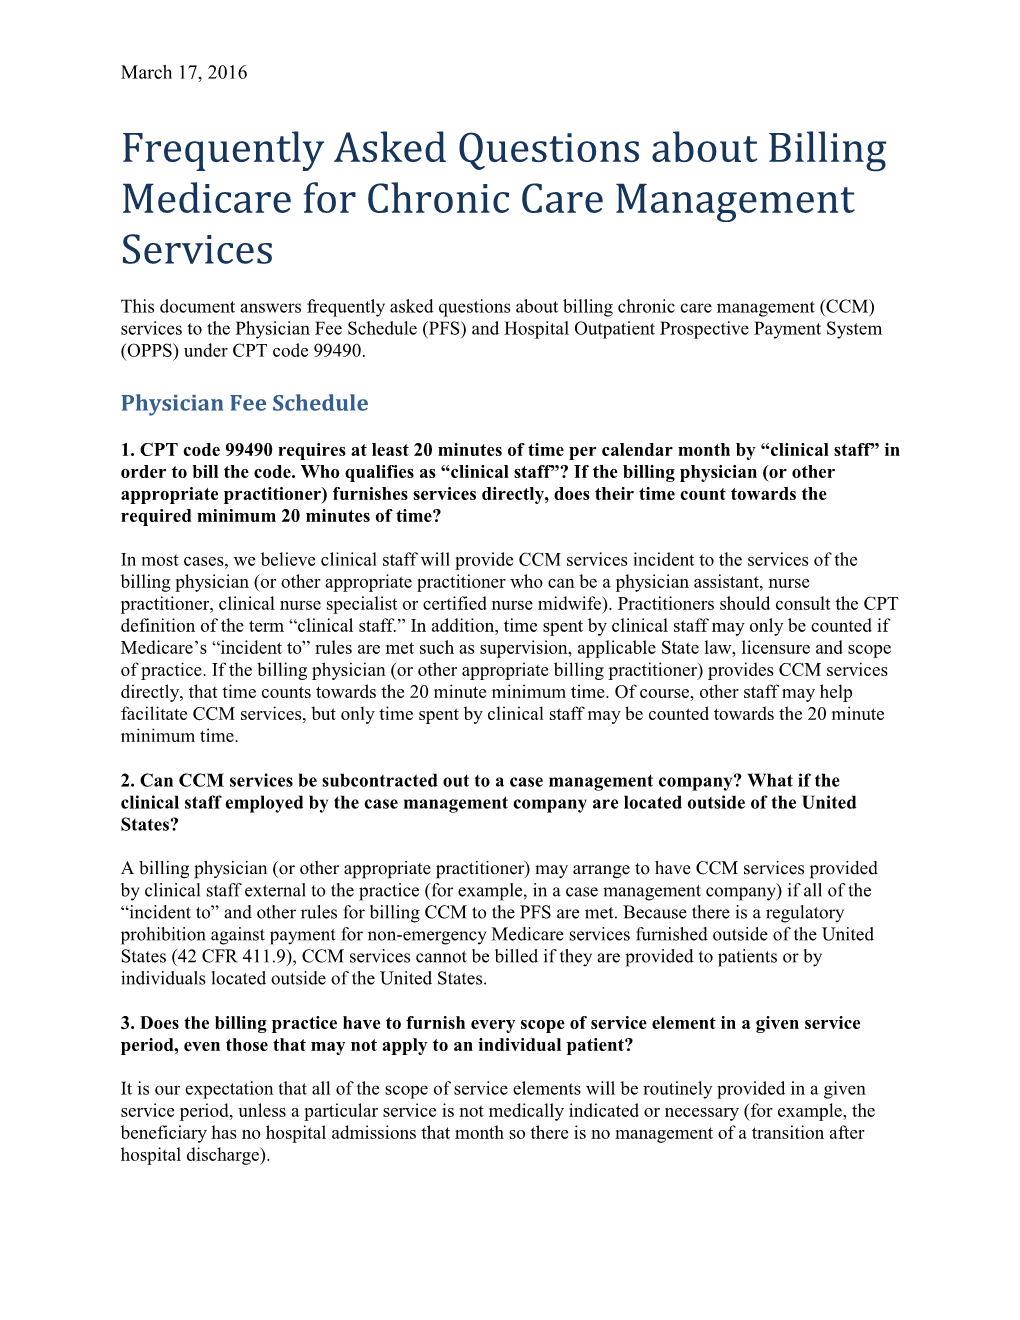 Frequently Asked Questions About Billing Medicare for Chronic Care Management Services